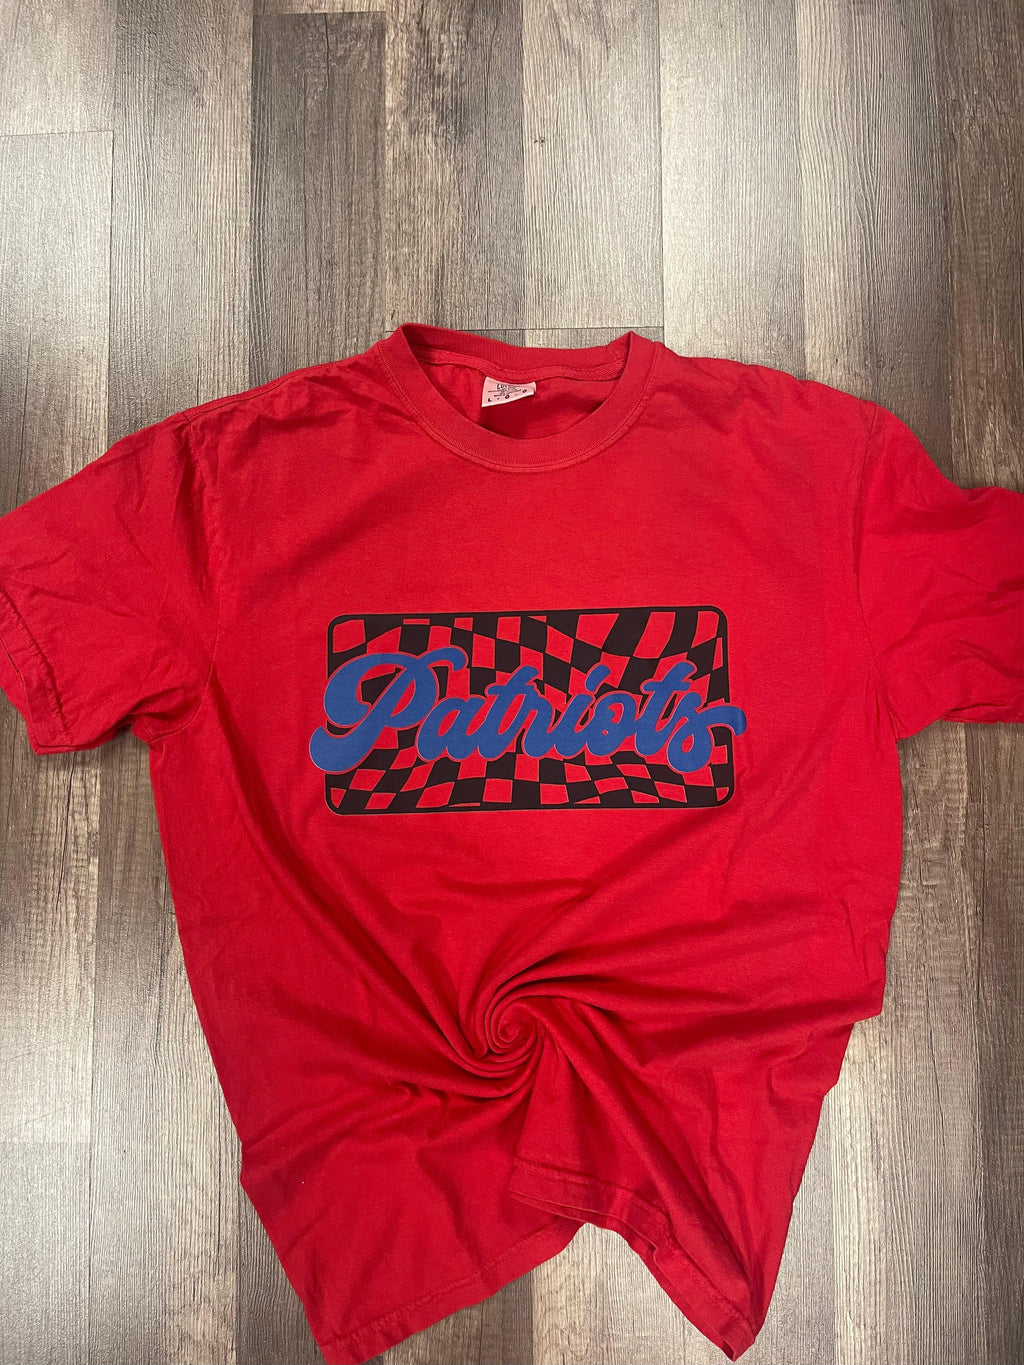 Atlanta Braves tomahawk logo tee – Downtown Southern Outfitters